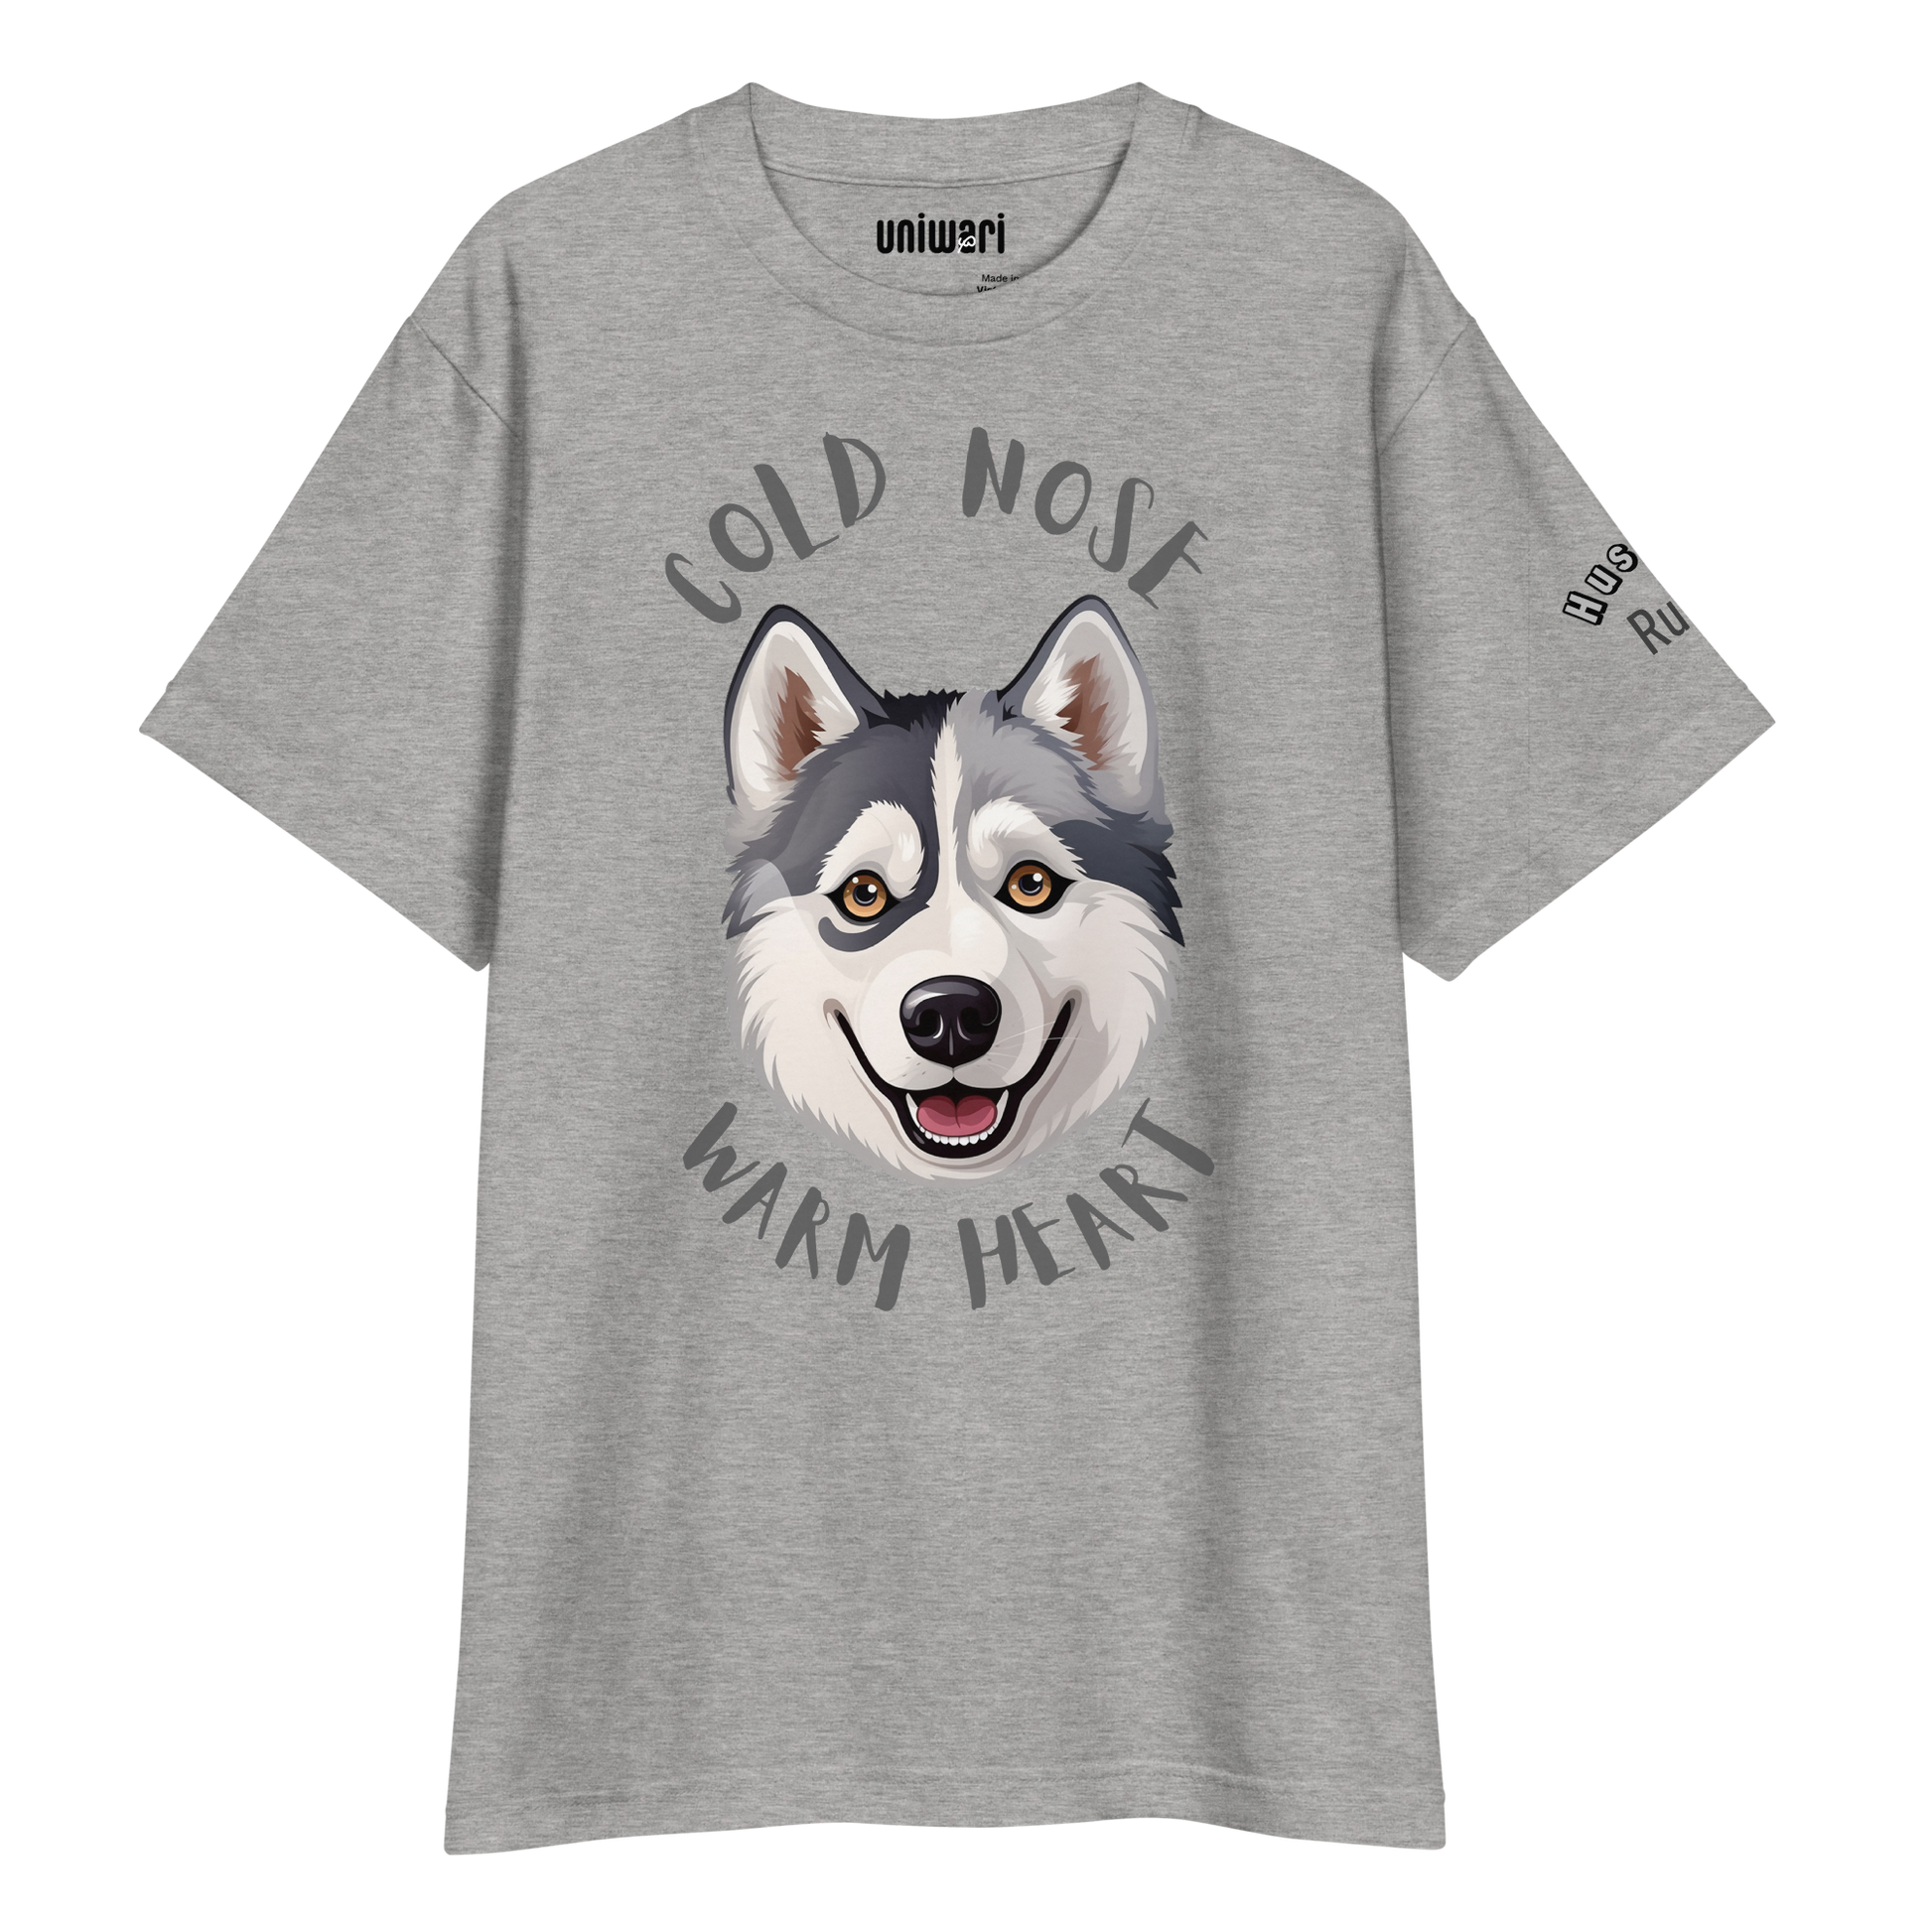 Gray High Quality Tee - Front Design with a stamp of a Husky and the phrase "cold nose warm heart" - Left Shoulder with phrase "Husky Rules"